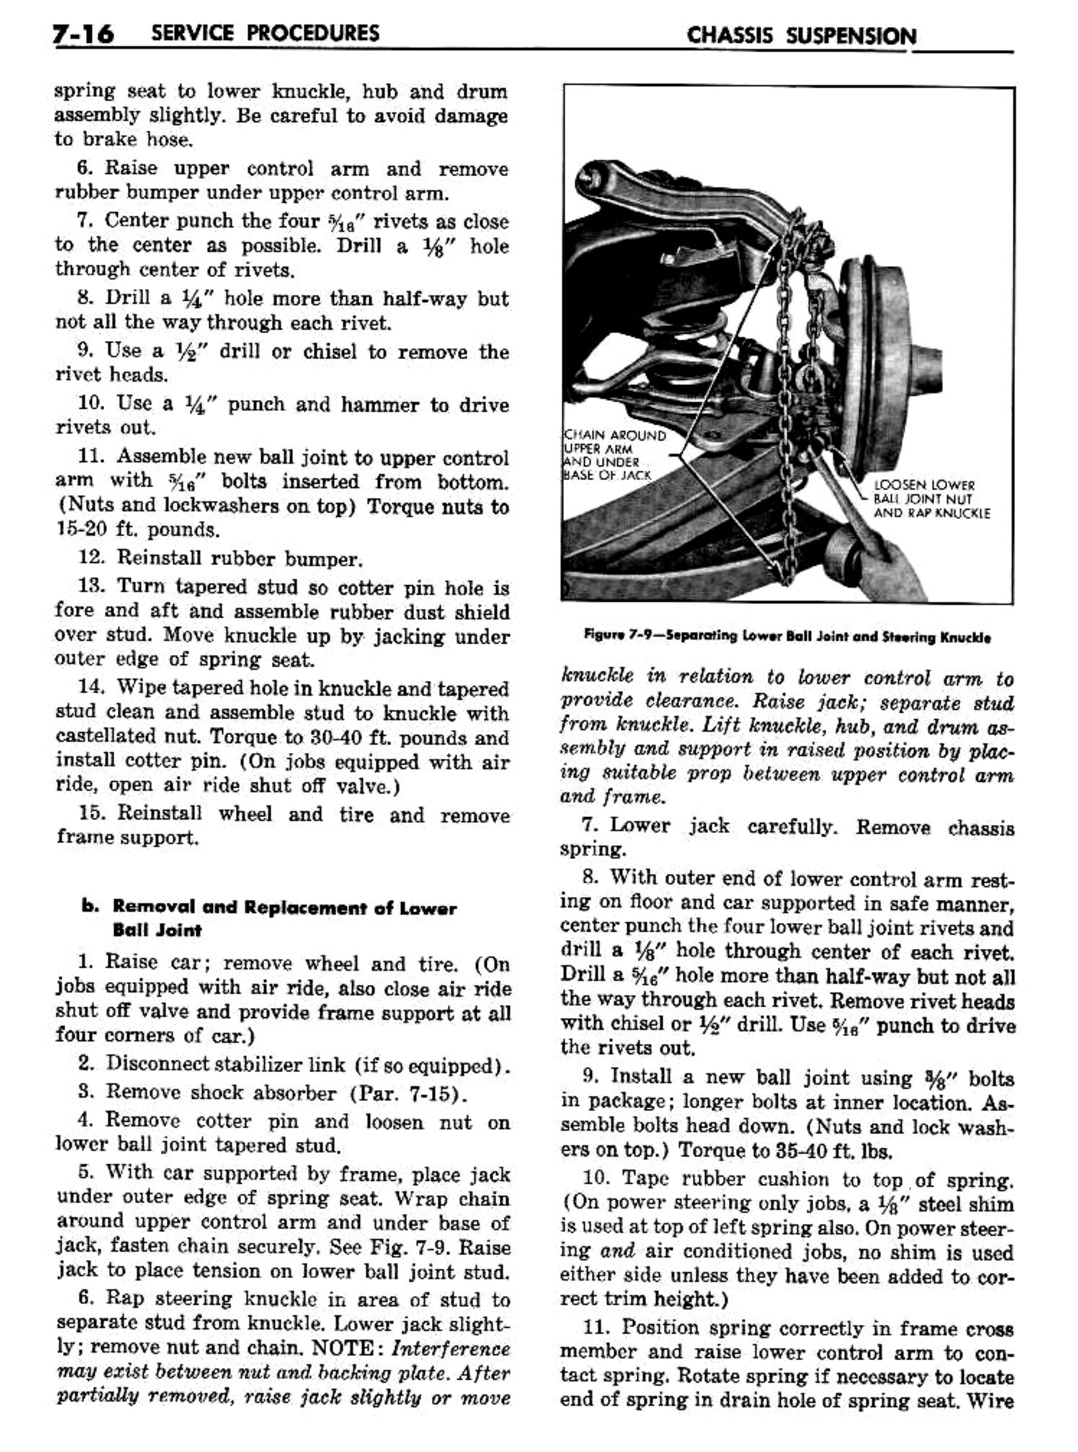 n_08 1960 Buick Shop Manual - Chassis Suspension-016-016.jpg